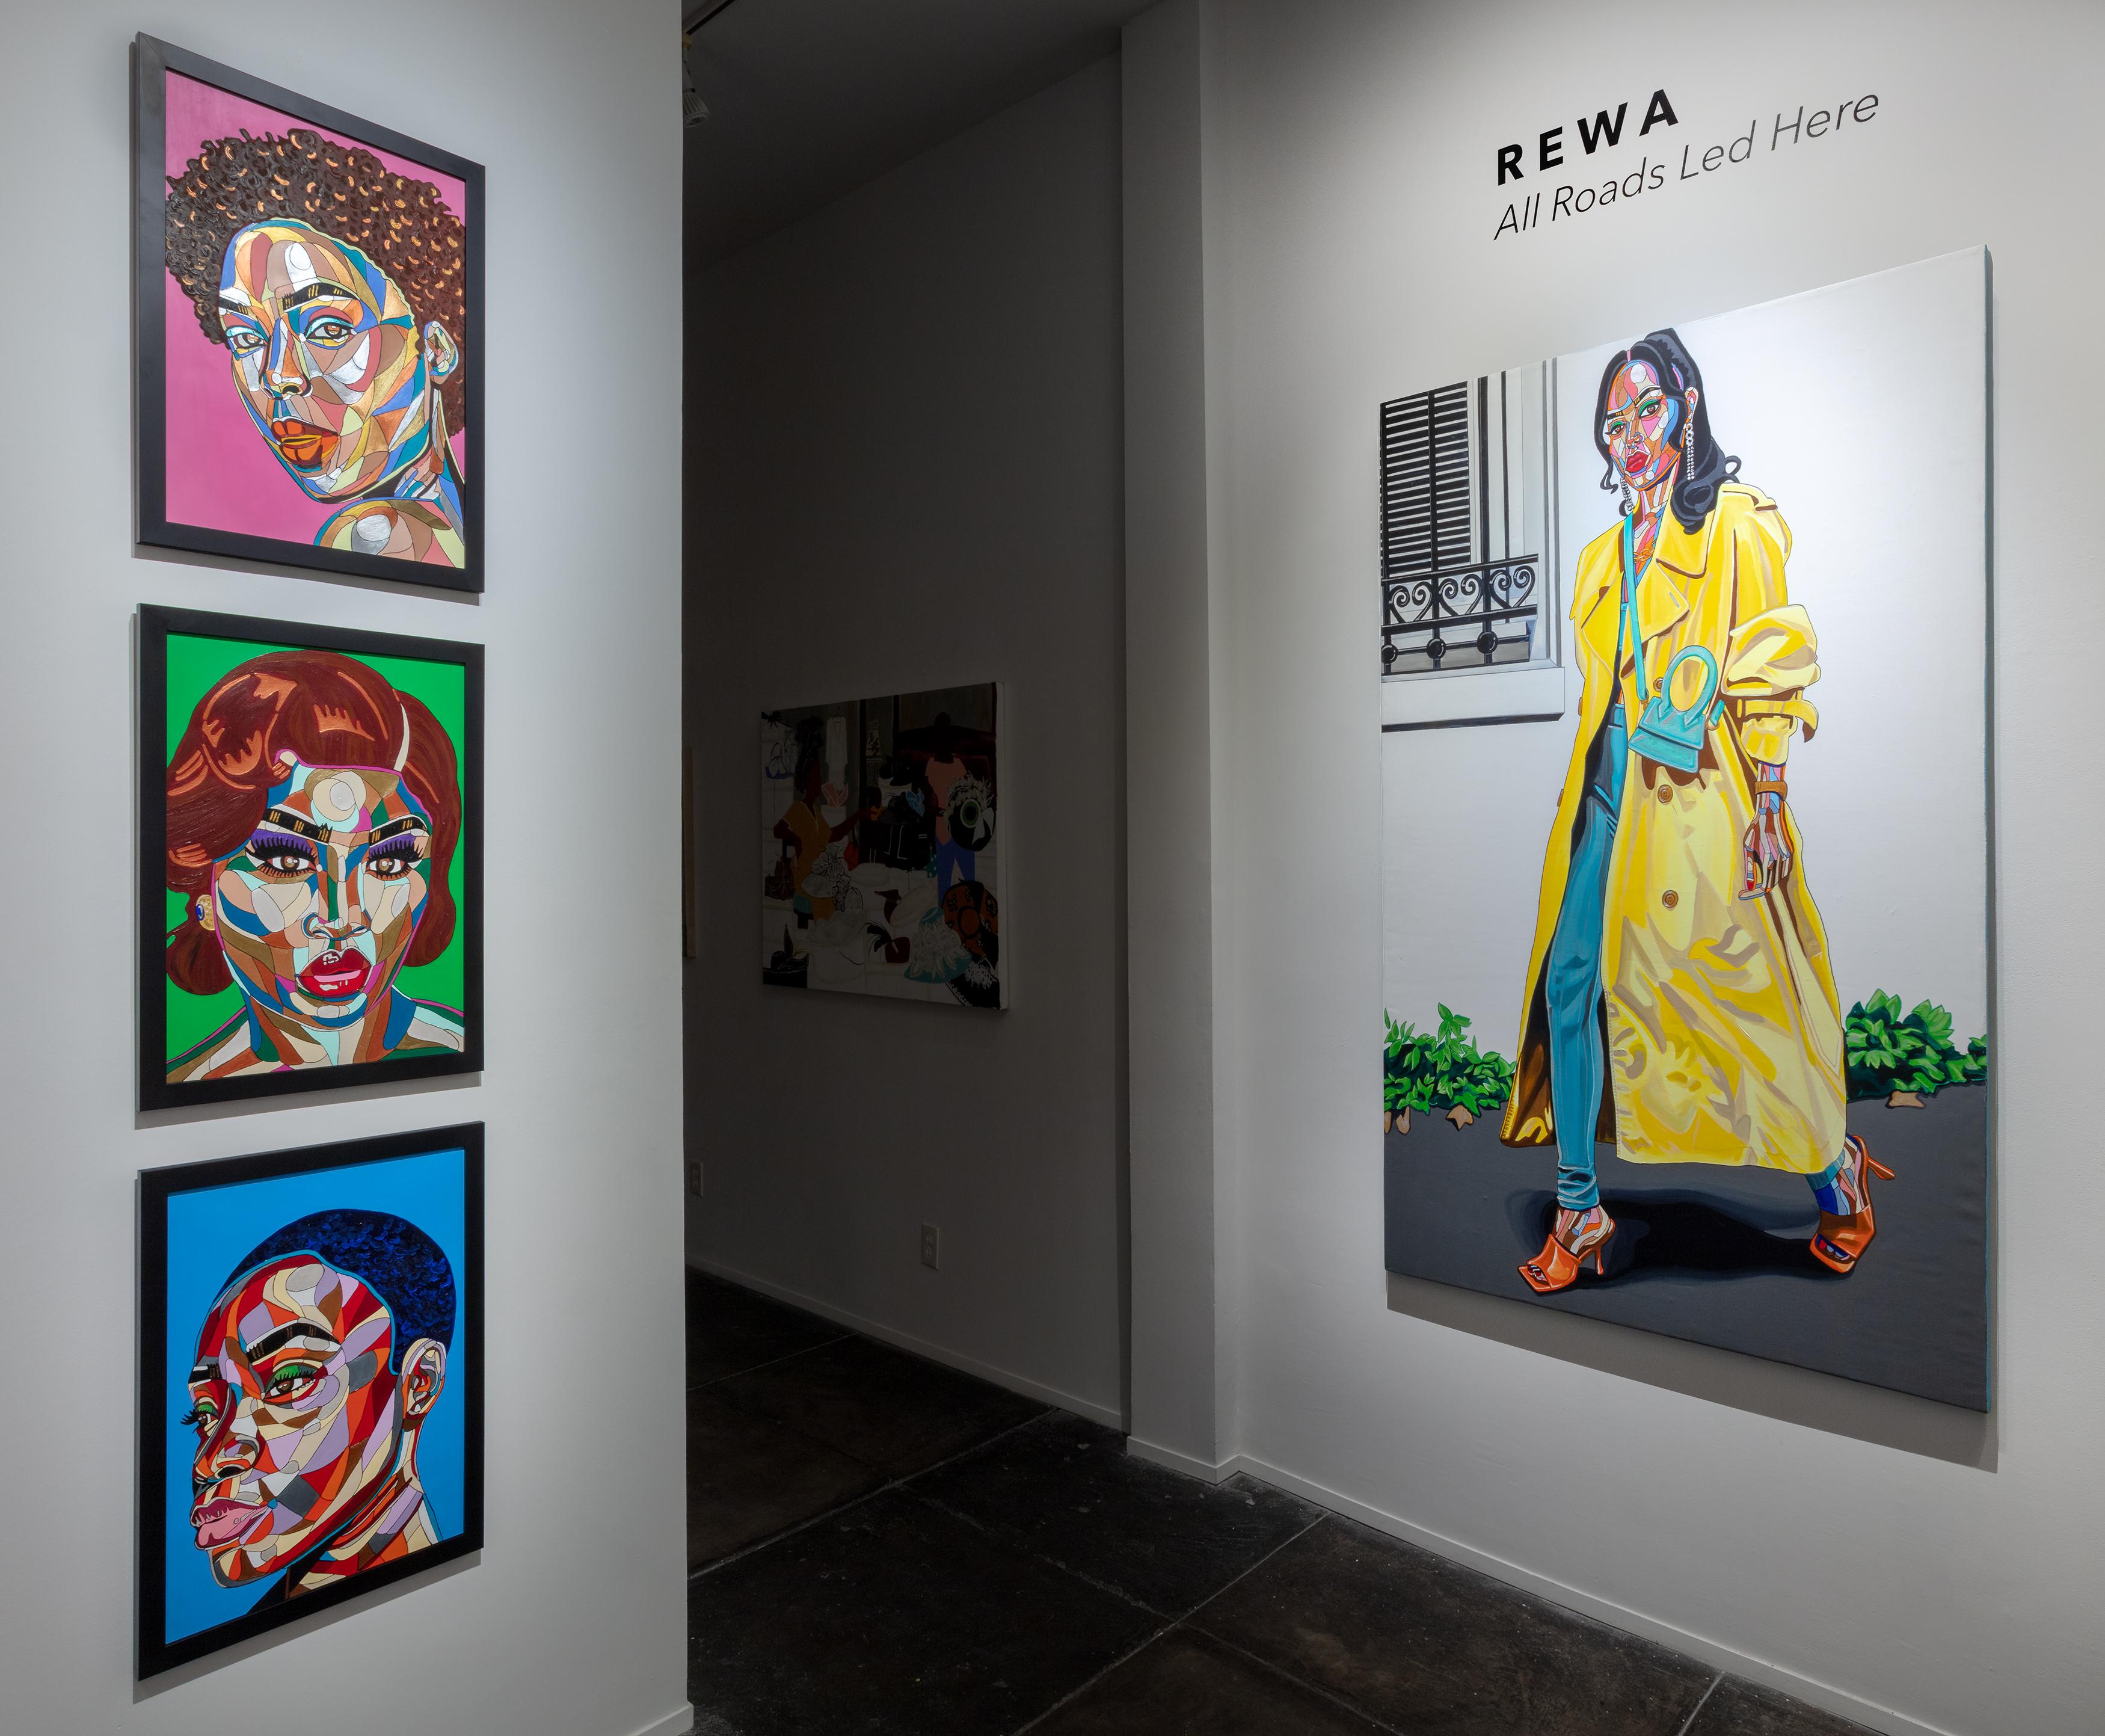 REWA says of her work…

Viewers largely label me under “Contemporary African Art”. I label my work as Igbo Vernacular Art. The reason for this is that I believe that I have created a truly original body of work that exists outside formal academic or